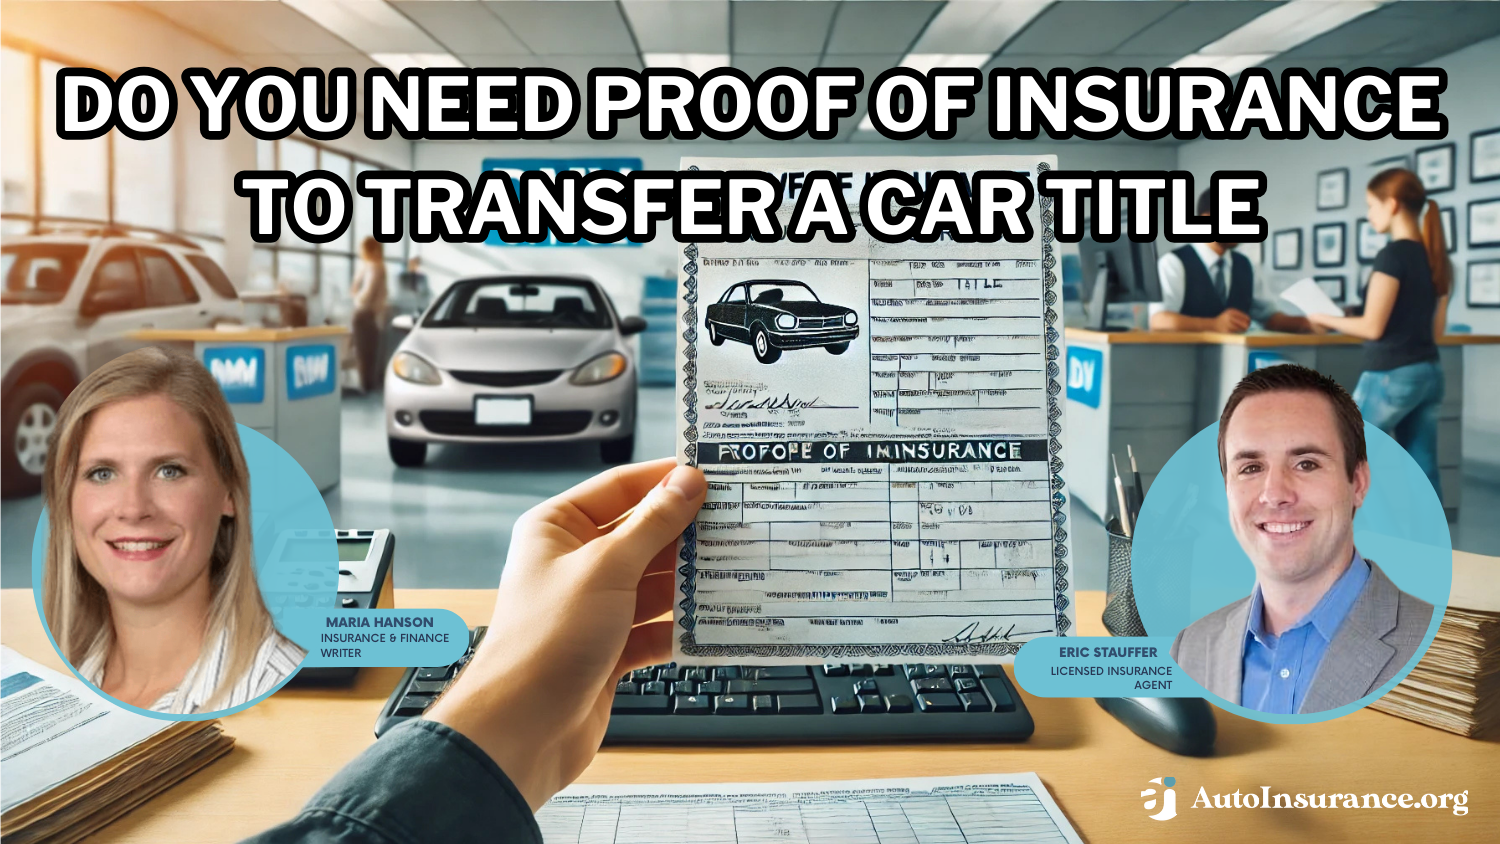 Do you need proof of insurance to transfer a car title?